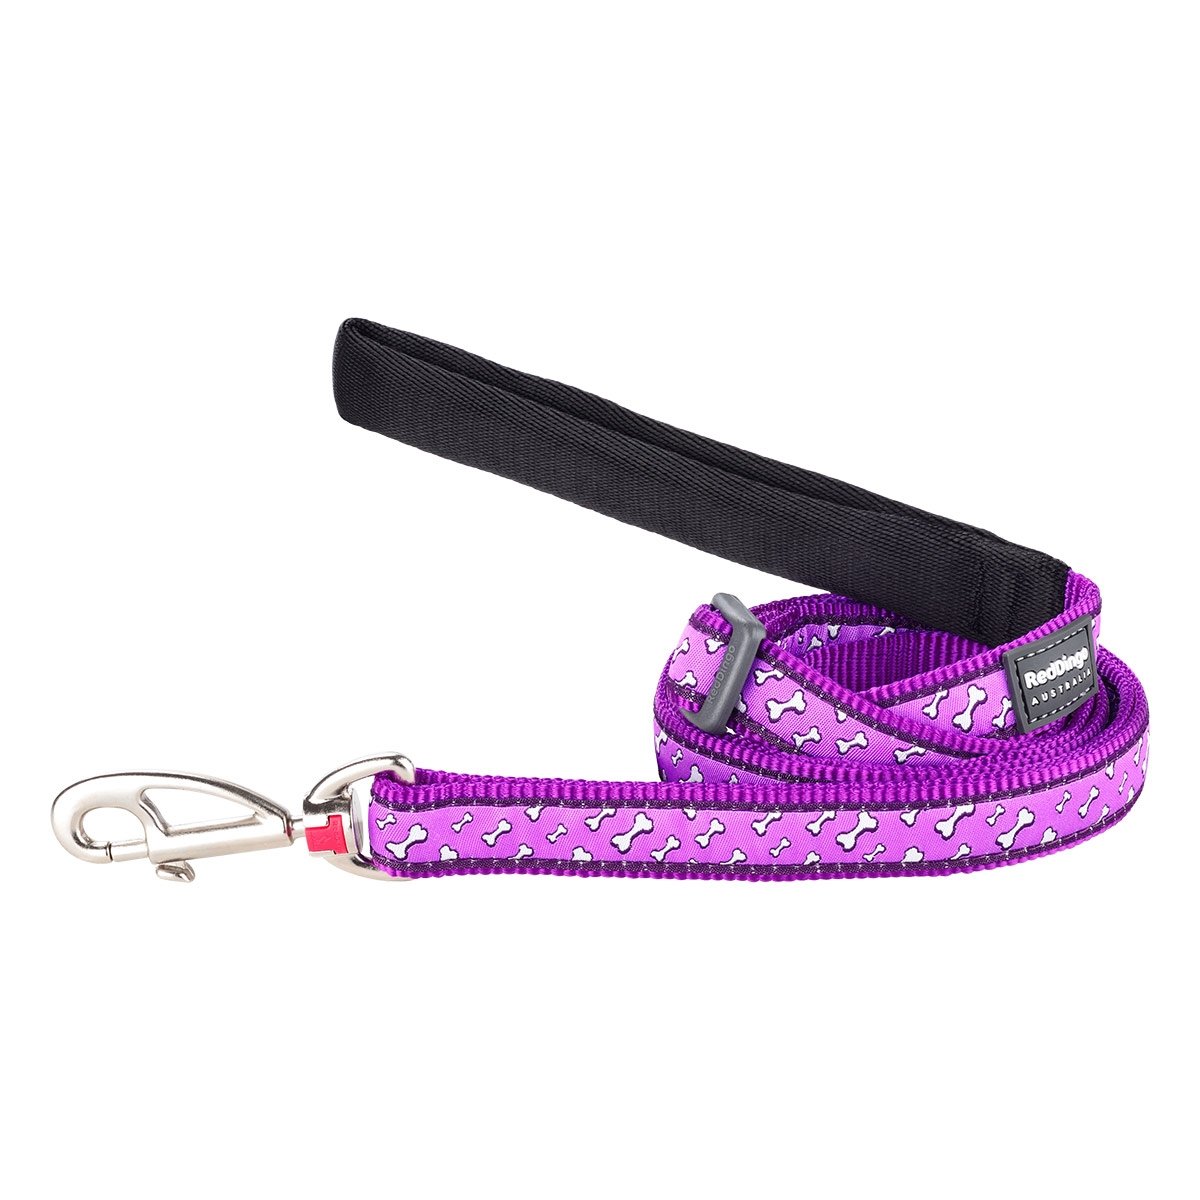 Picture of Red Dingo L6-FL-PU-15 Dog Lead Design Flying Bones Purple - Small 6ft